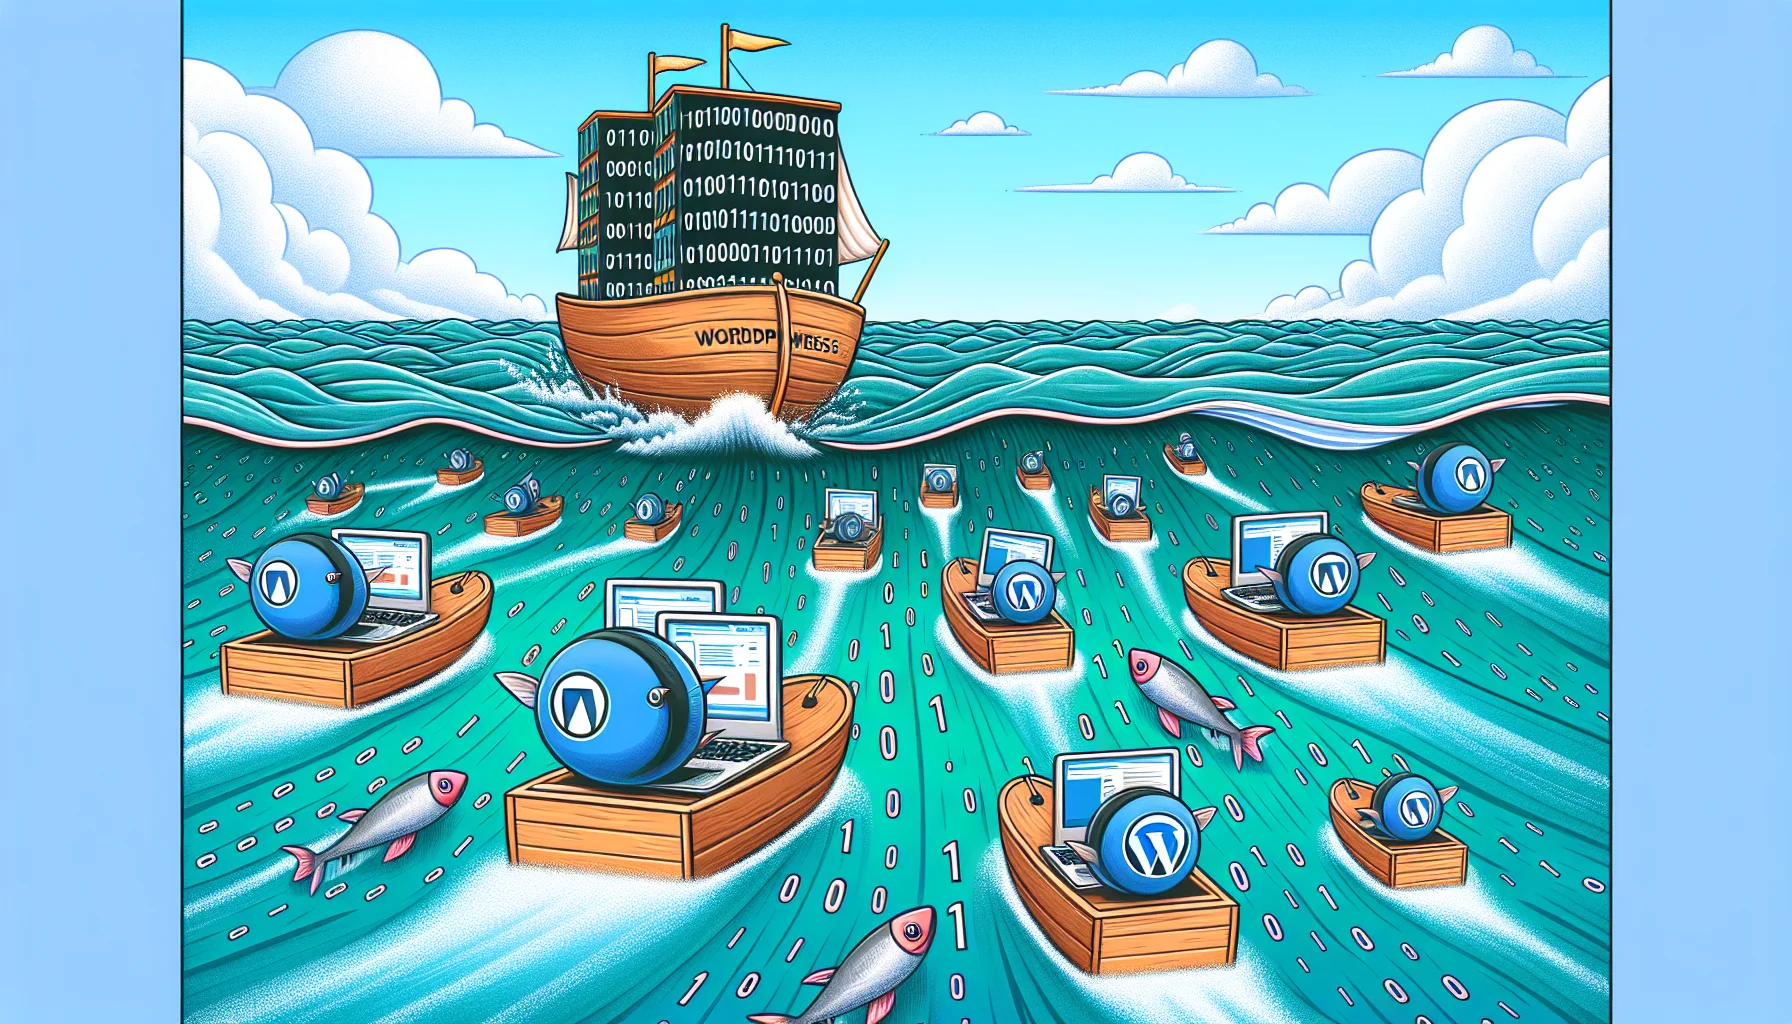 Create a humorous image illustrating the concept of web hosting with DigitalOcean and WordPress. Showcase a metaphorical ocean filled with digital bits and bytes, where small and large sailboats labeled 'WordPress' navigate through the waters. The larger sailboats are equipped with powerful engines indicating the robustness of the hosting. To add a funny twist, picture binary code fish jumping out of the digital waves and using laptops to manage websites. This cartoonish scene should evoke the easiness, effectiveness, and enjoyment of using DigitalOcean for WordPress hosting.